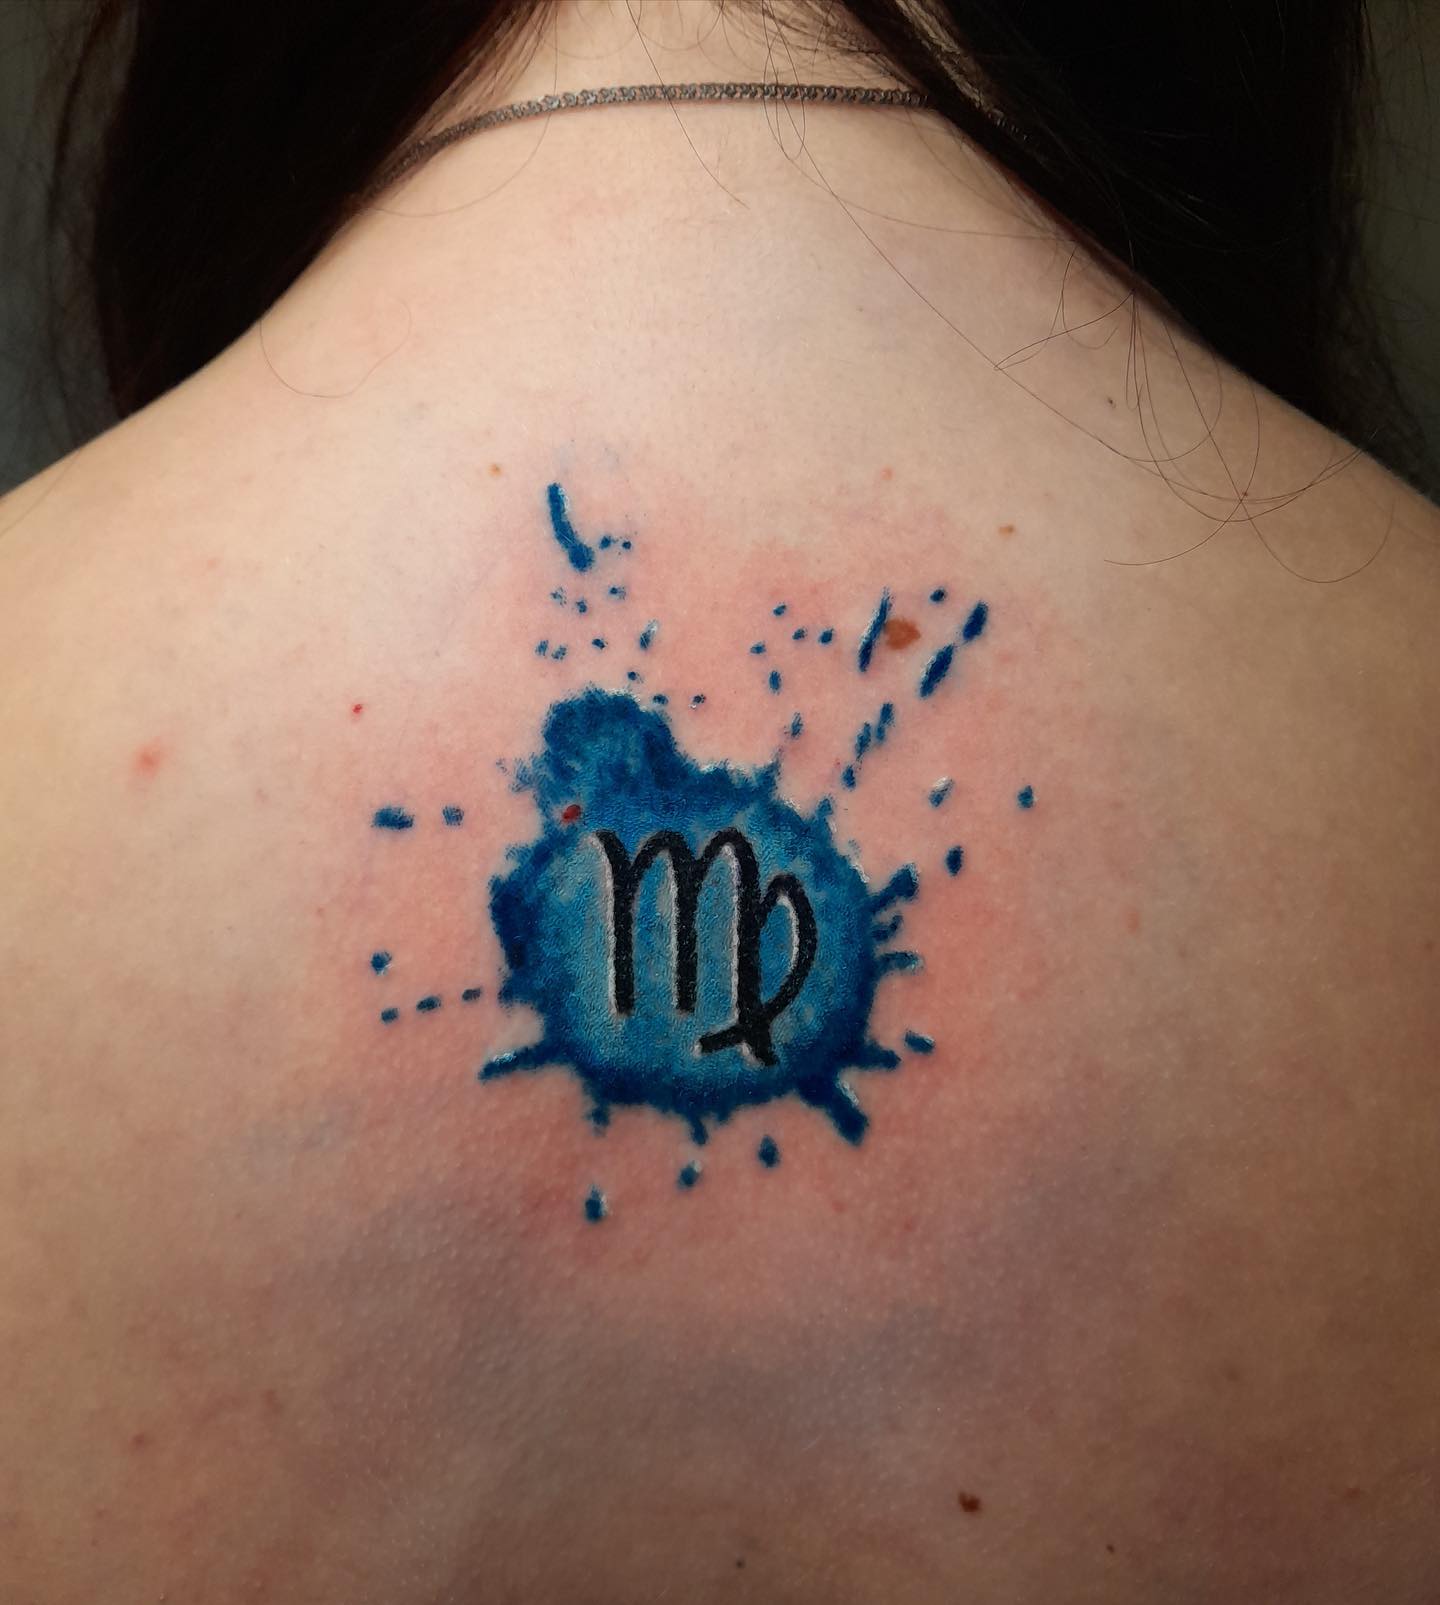 A Virgo tattoo adorned with blue splash effect could be an interesting design to have on your body. Go for it if you like creative tattoos.